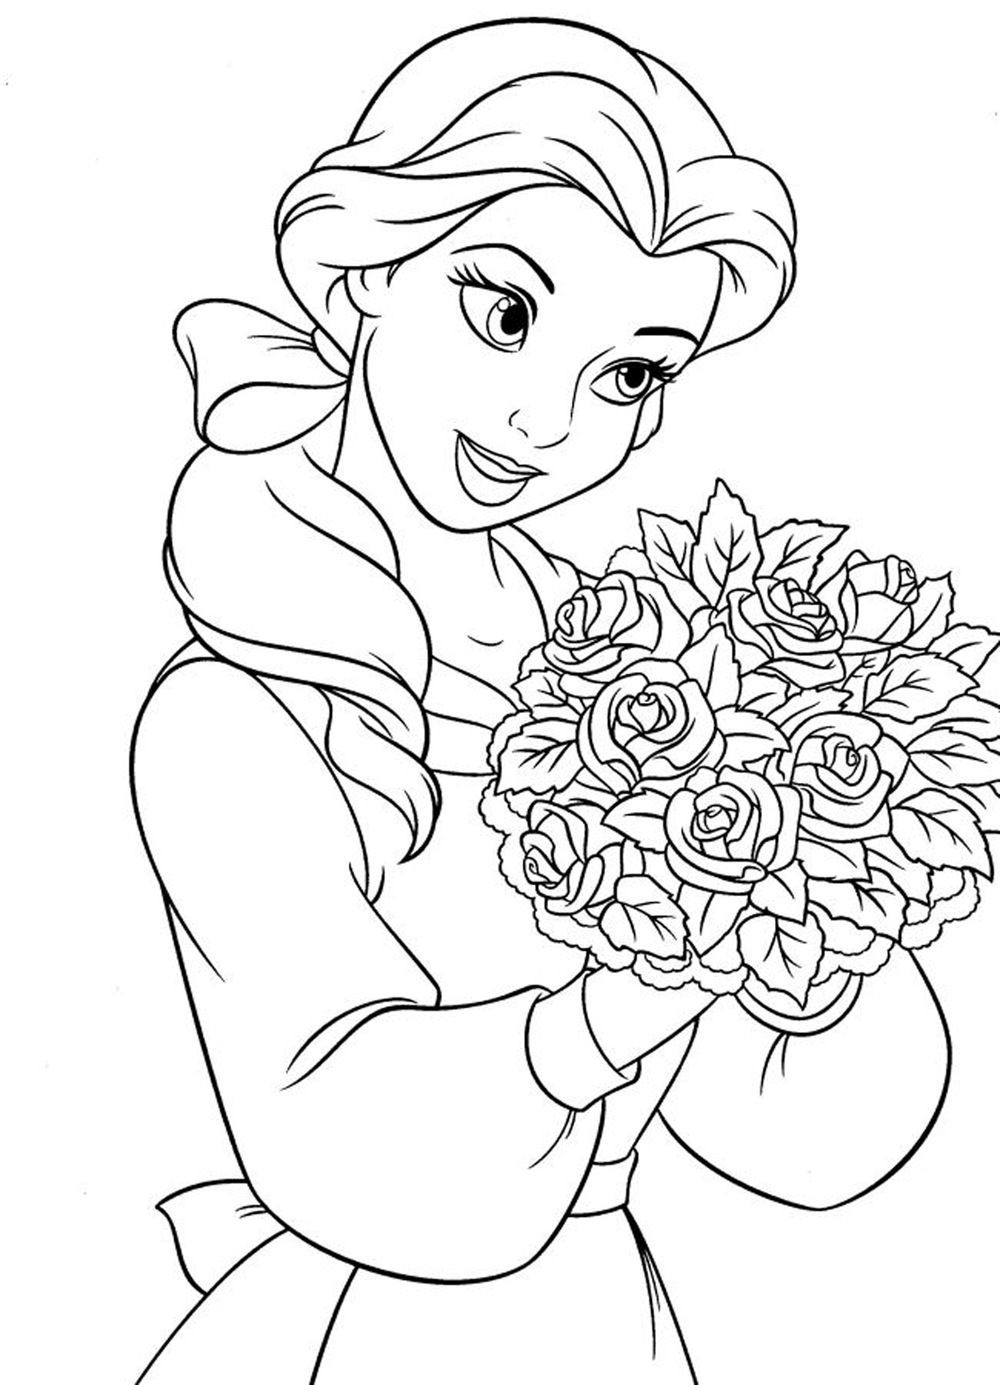 Coloring Sheets Of Girls
 Detailed Coloring Pages For Girls at GetColorings